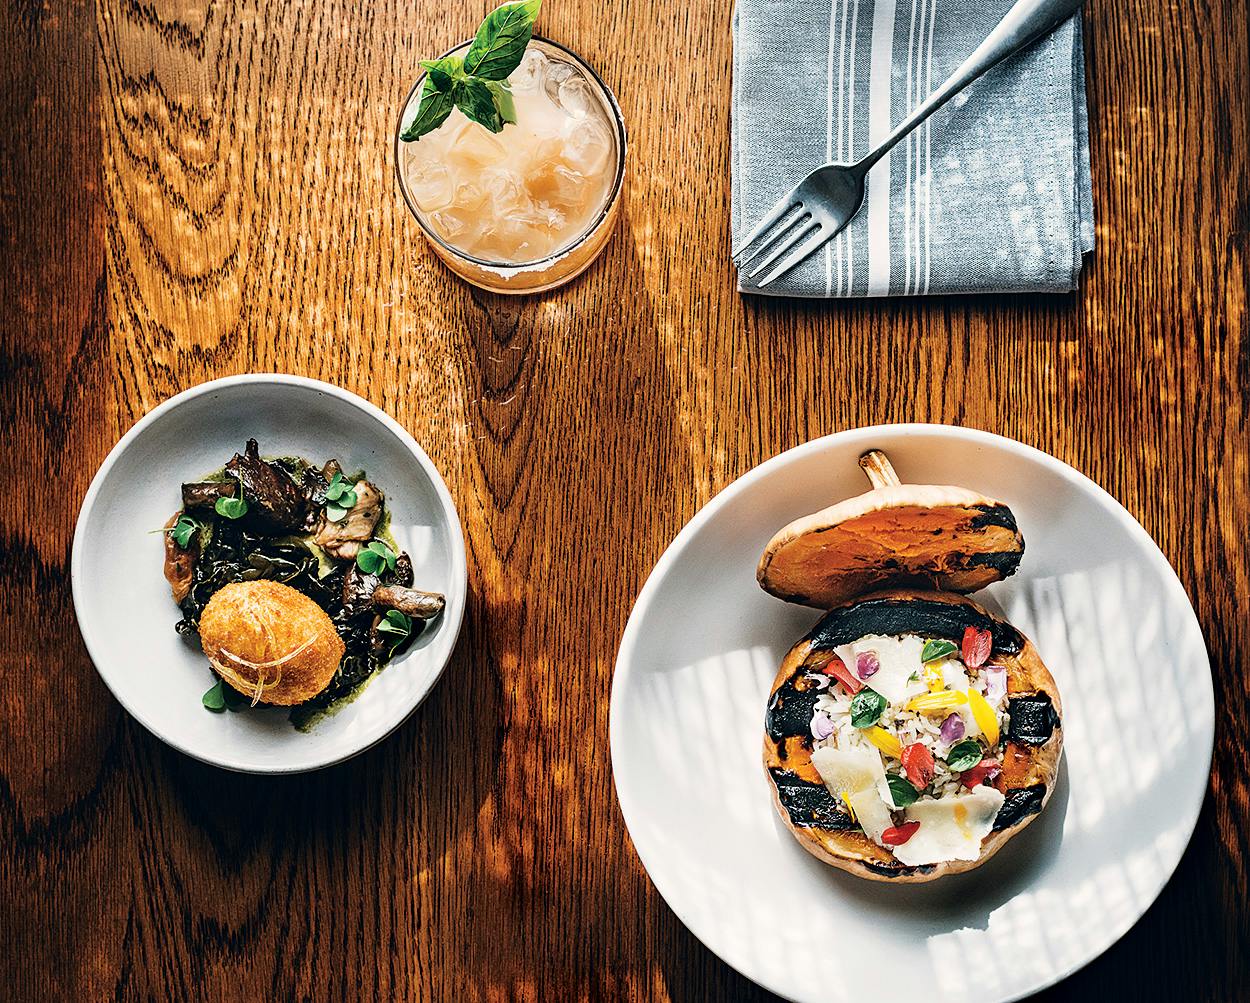 A breaded duck egg with smoked mushrooms, the Oaxaca Smash, and roasted butterkin squash.